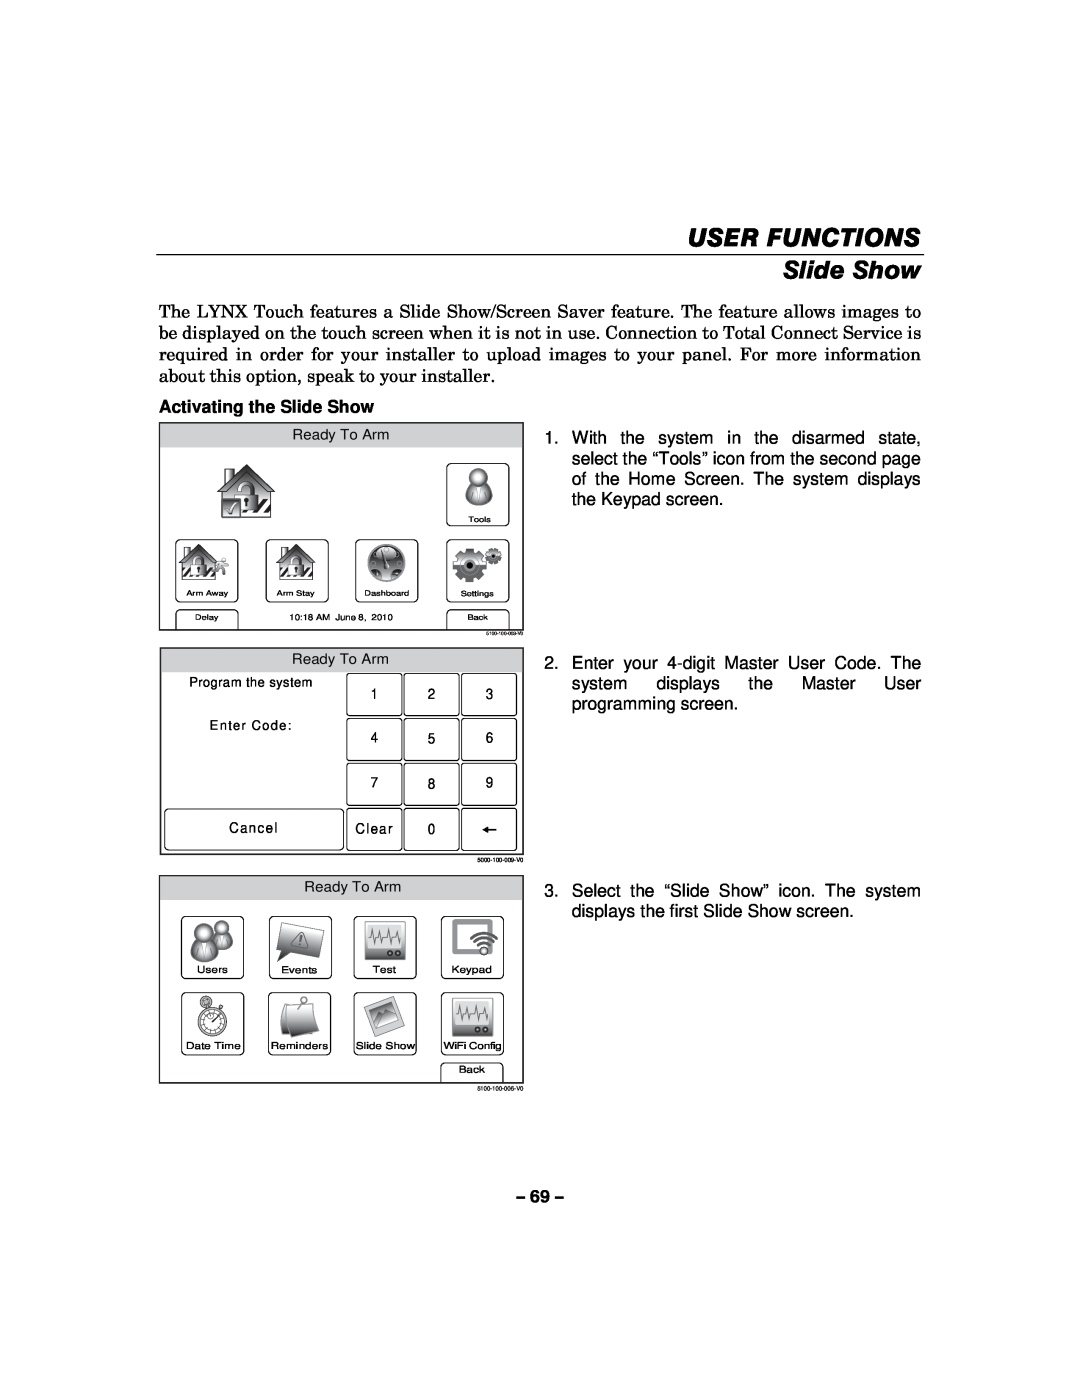 Honeywell L5100 manual USER FUNCTIONS Slide Show, Activating the Slide Show 